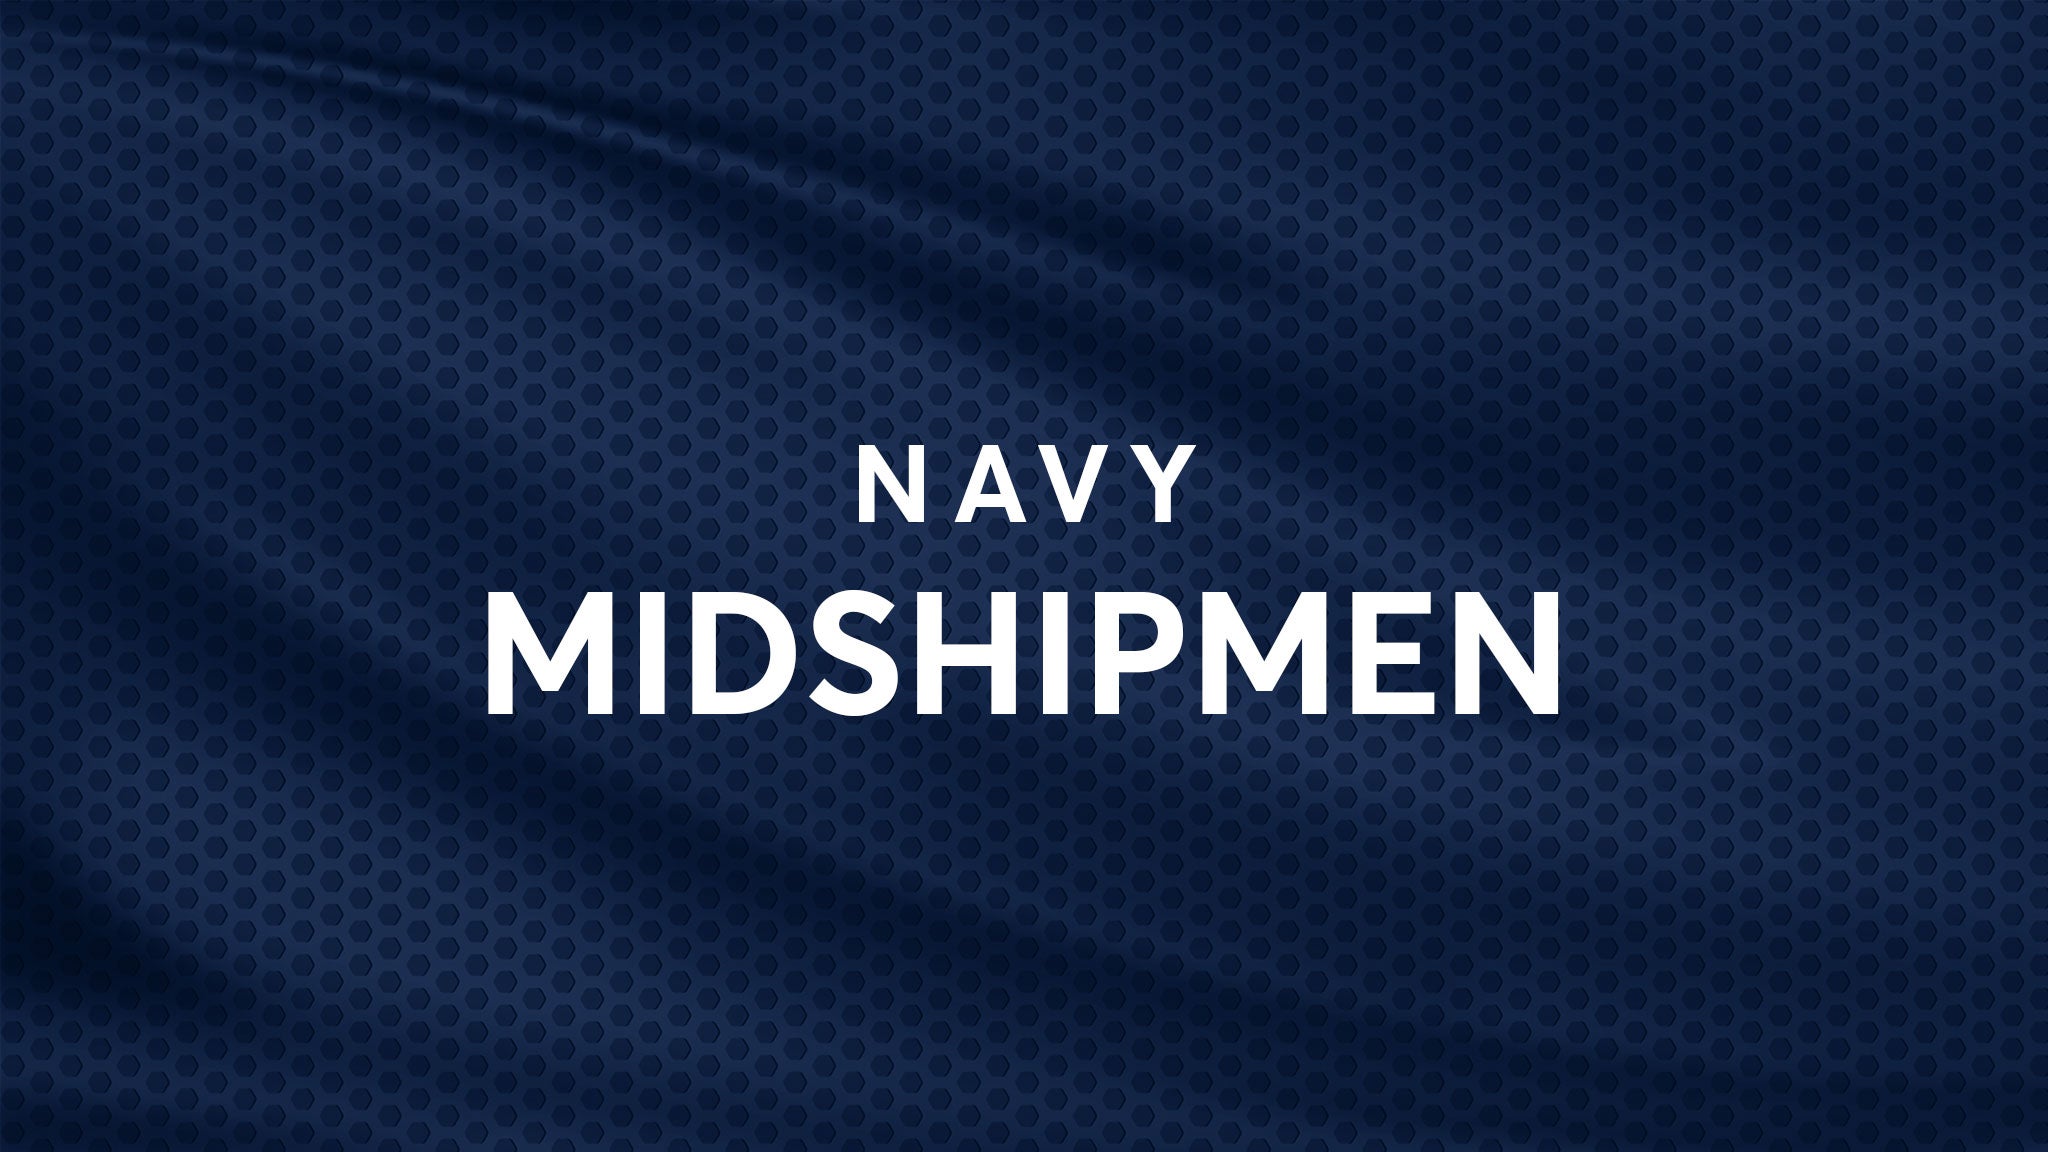 Navy-Notre Dame Game presented by Navy Federal and Navy Mutual presales in East Rutherford